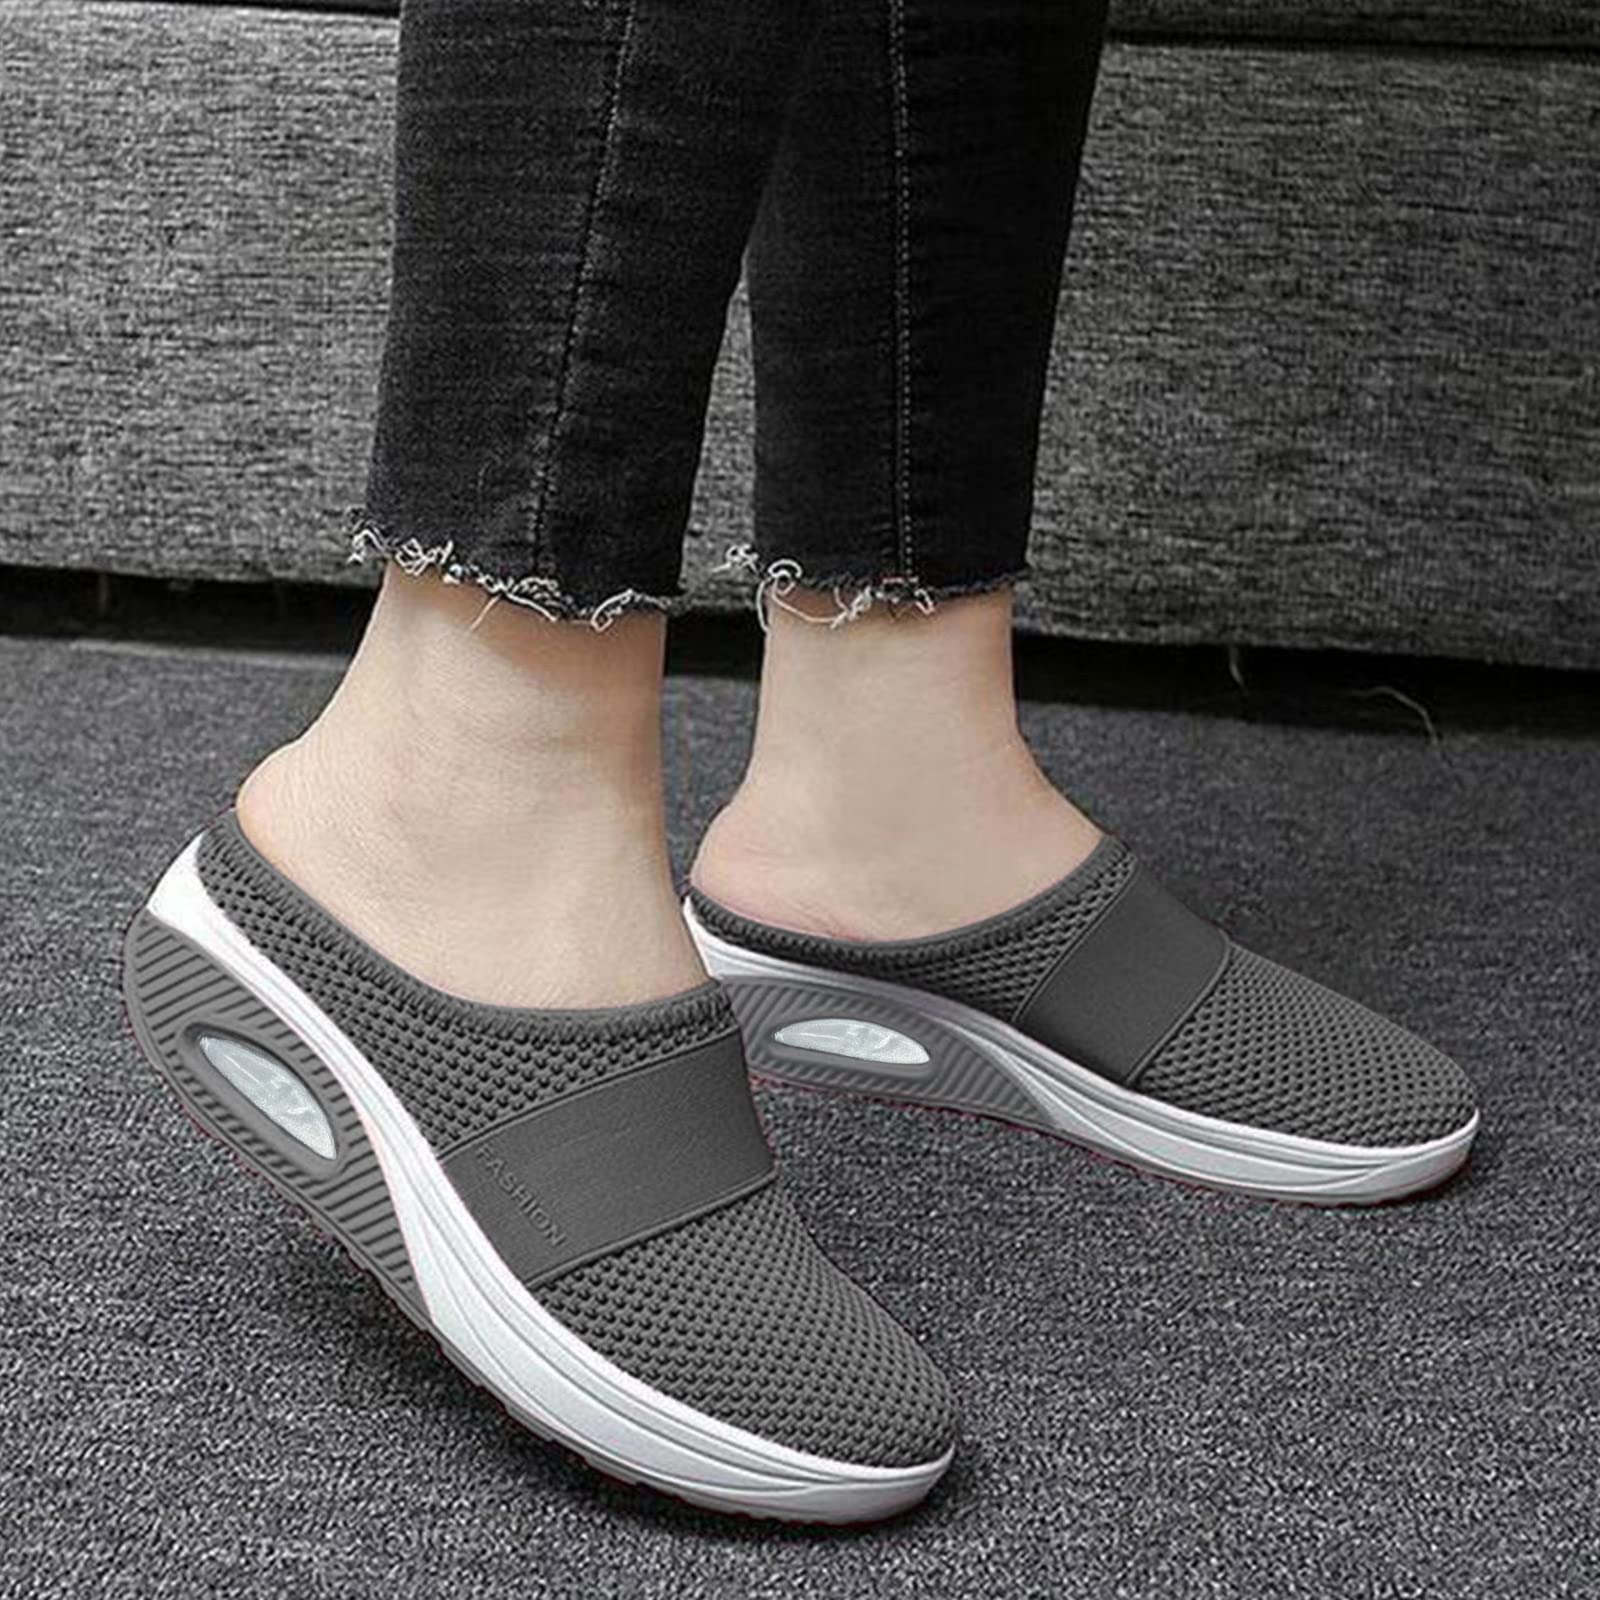 Women's Fashion Sneakers Wide Width Canvas Breathable, Canvas High Top Sneakers for Women Knit Mesh Womens Sandals with Heels Short Heel Casual Shoes Unisex Fashion Autumn